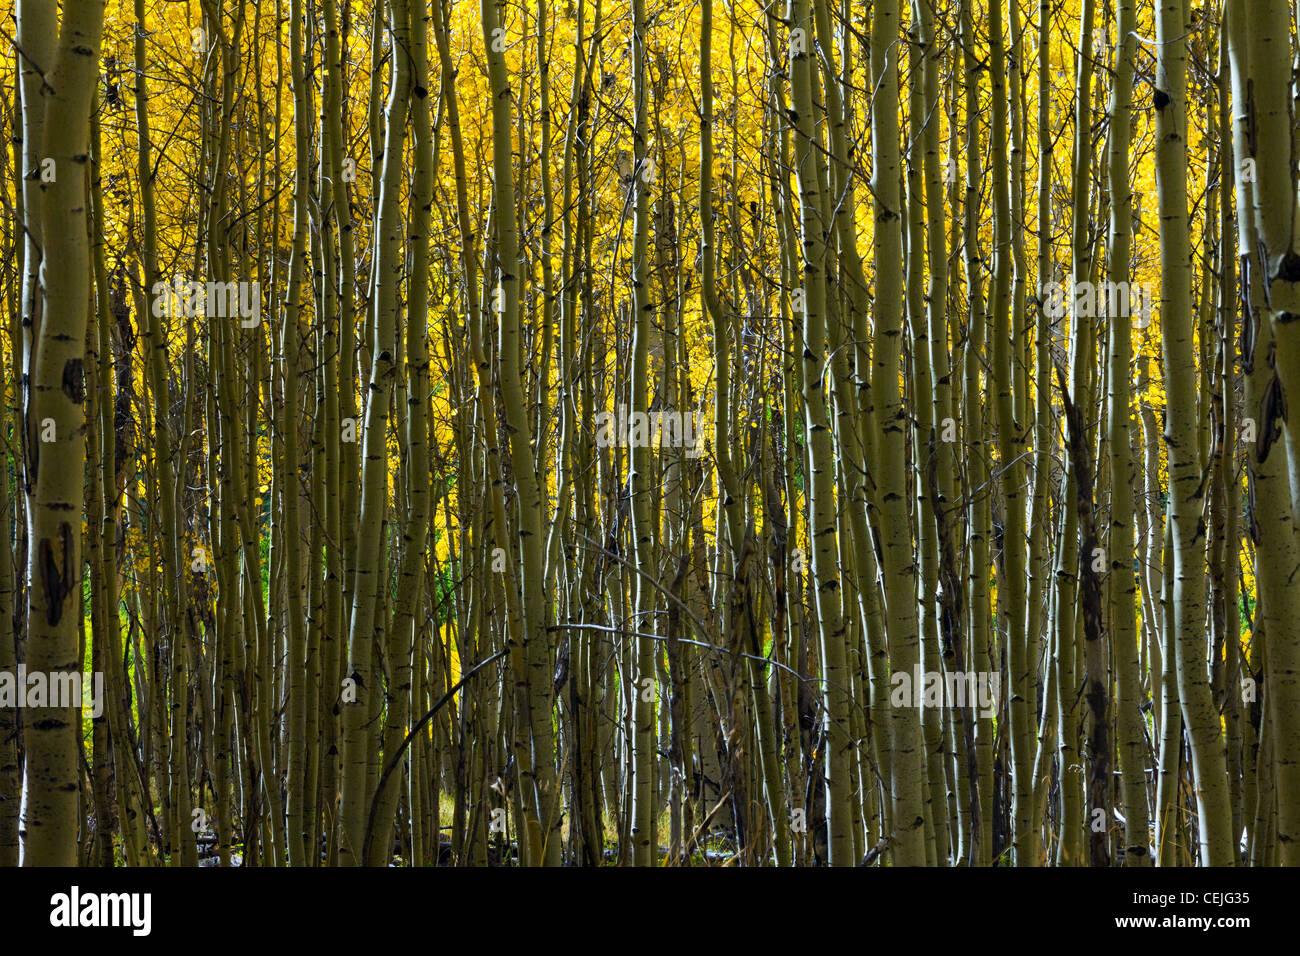 Abstract background pattern of contrasting colors created by forest of Colorado aspen trees in Fall. Stock Photo